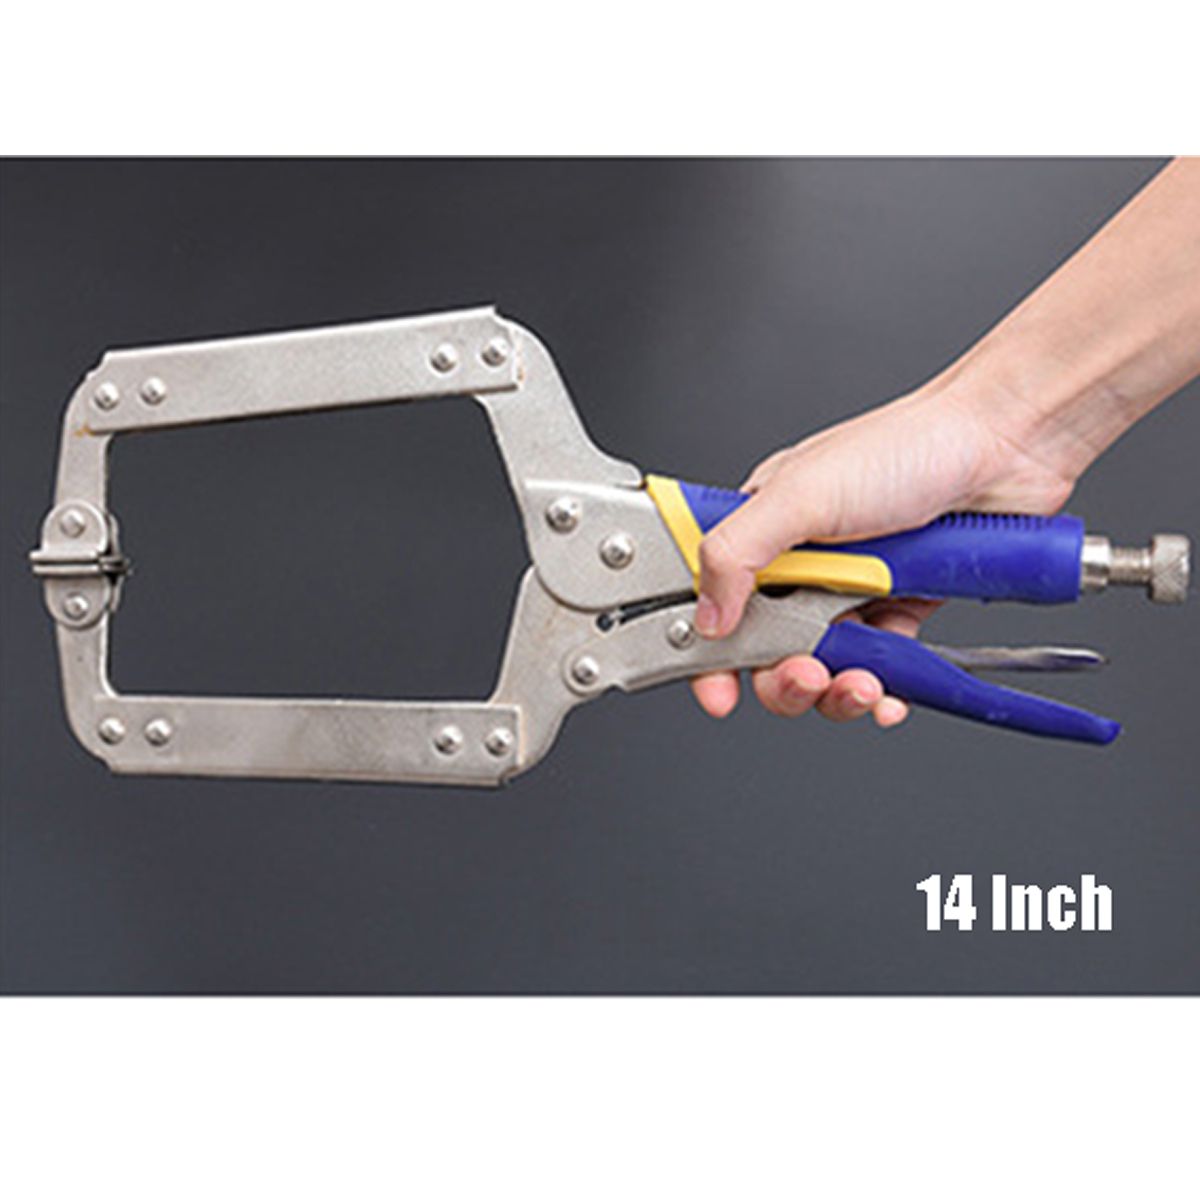 Steel-C-Type-Pliers-Locking-Clamp-Tool-Set-6-9-11-14-18-Inch-Face-Clamp-Hand-Tools-1550137